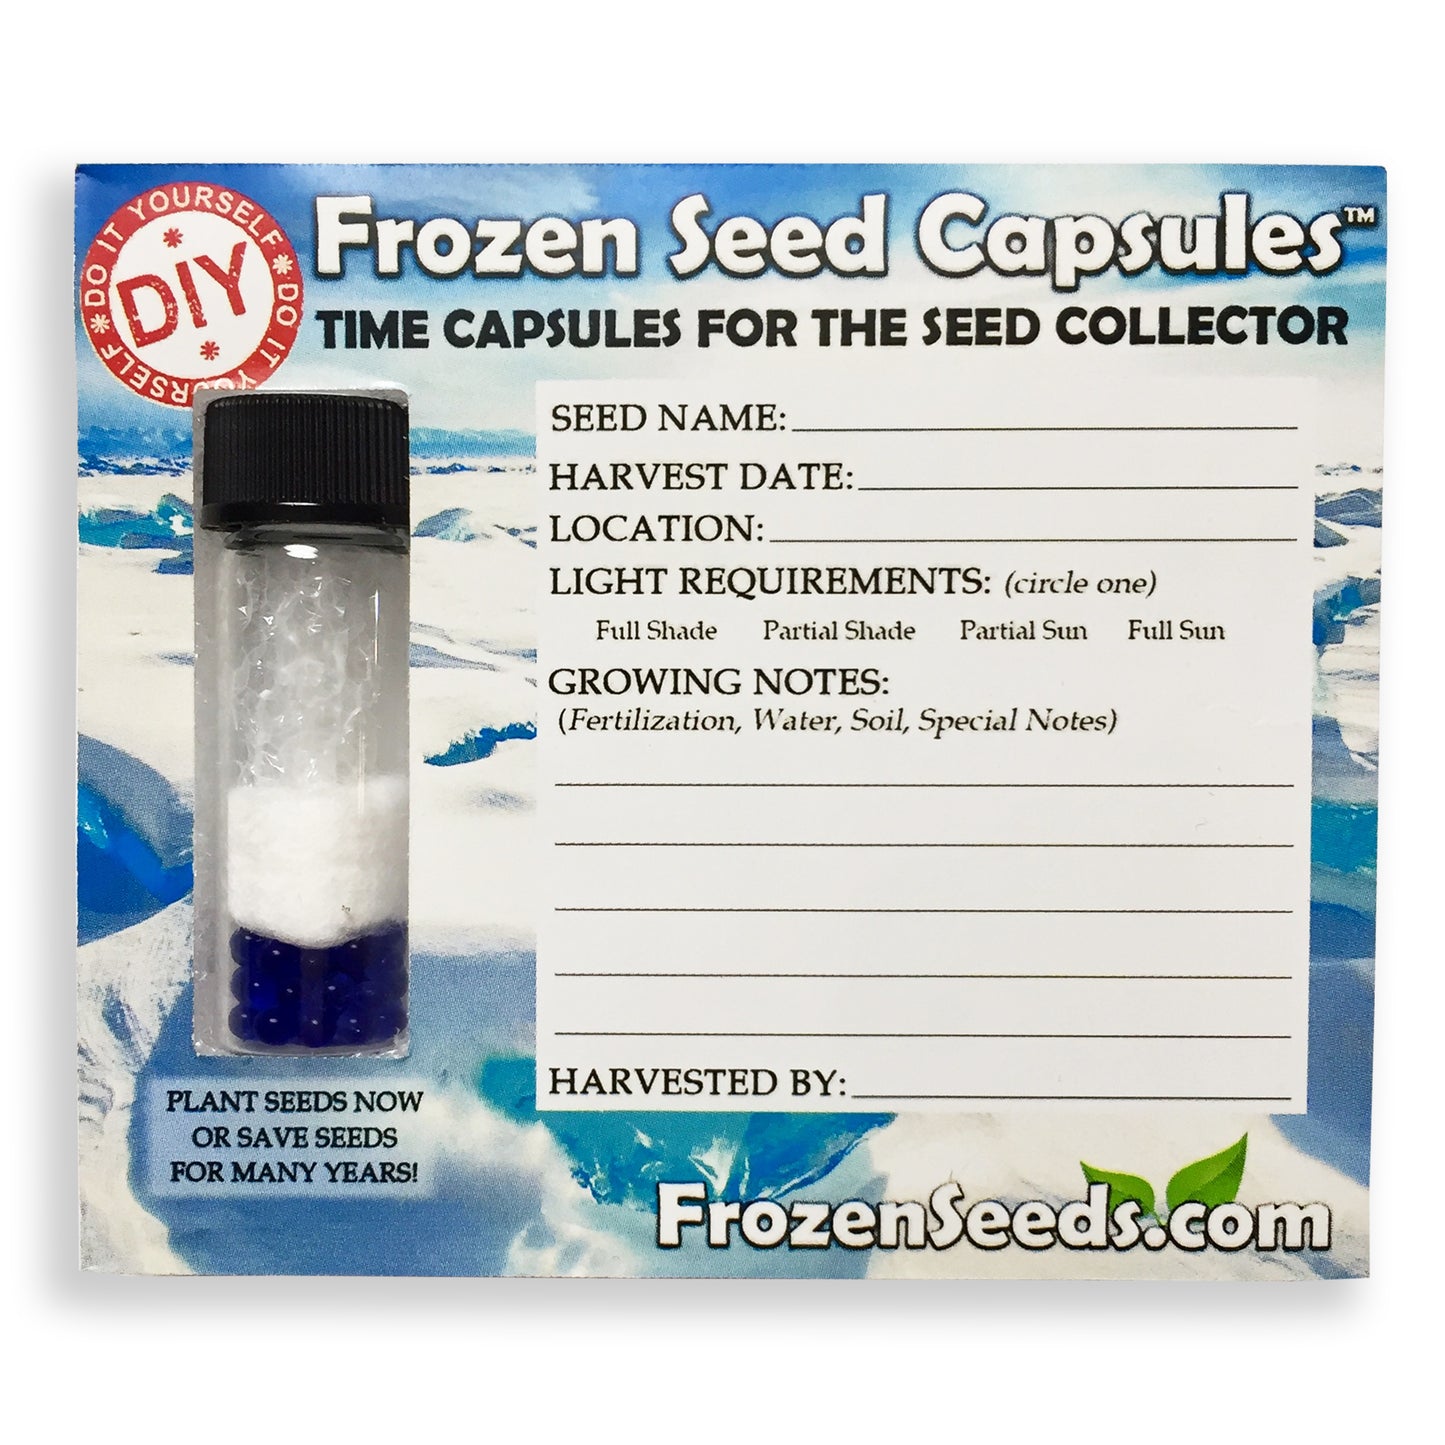 Frozen Seed Capsules™ 'Do-It-Yourself' DIY Small Seed Storage Capsules - Ideal for Small Seeds - The Very Best in Proper Long-term Seed Storage